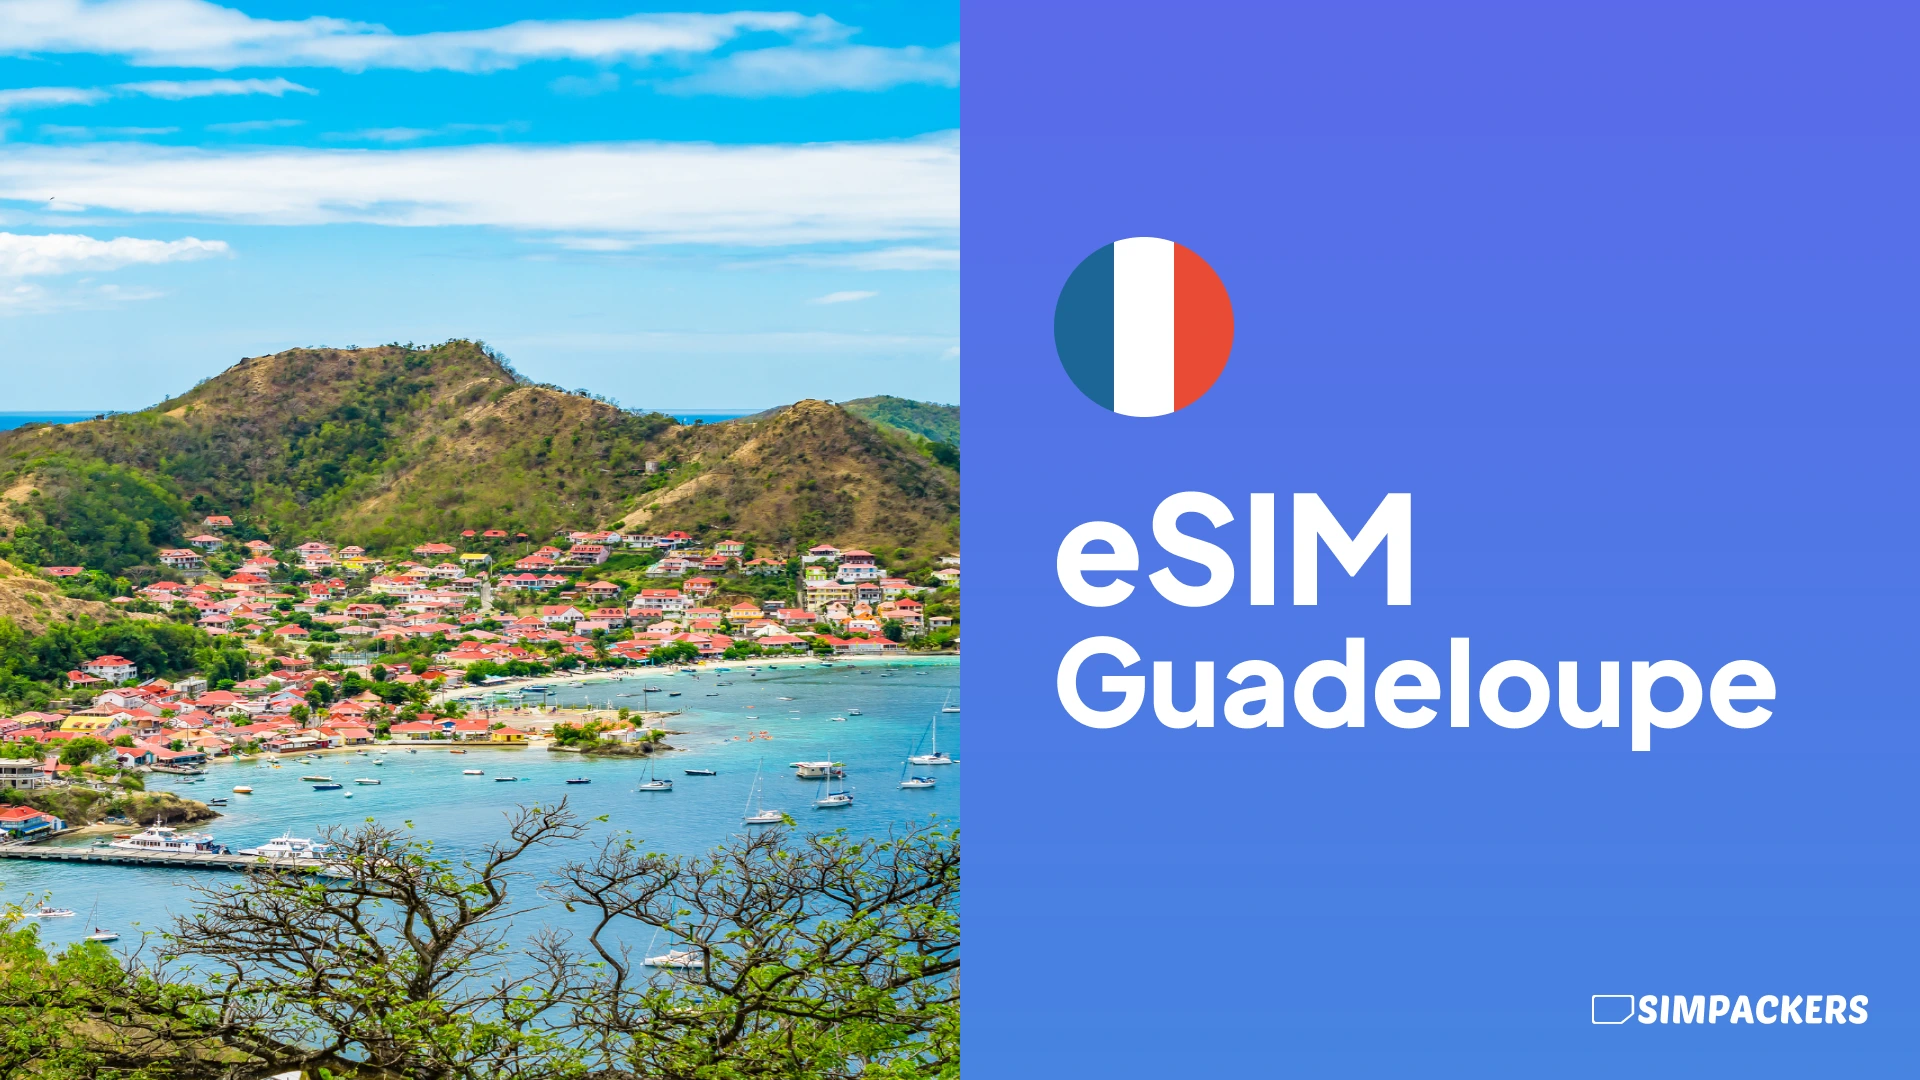 FR/FEATURED_IMAGES/esim-guadeloupe.webp